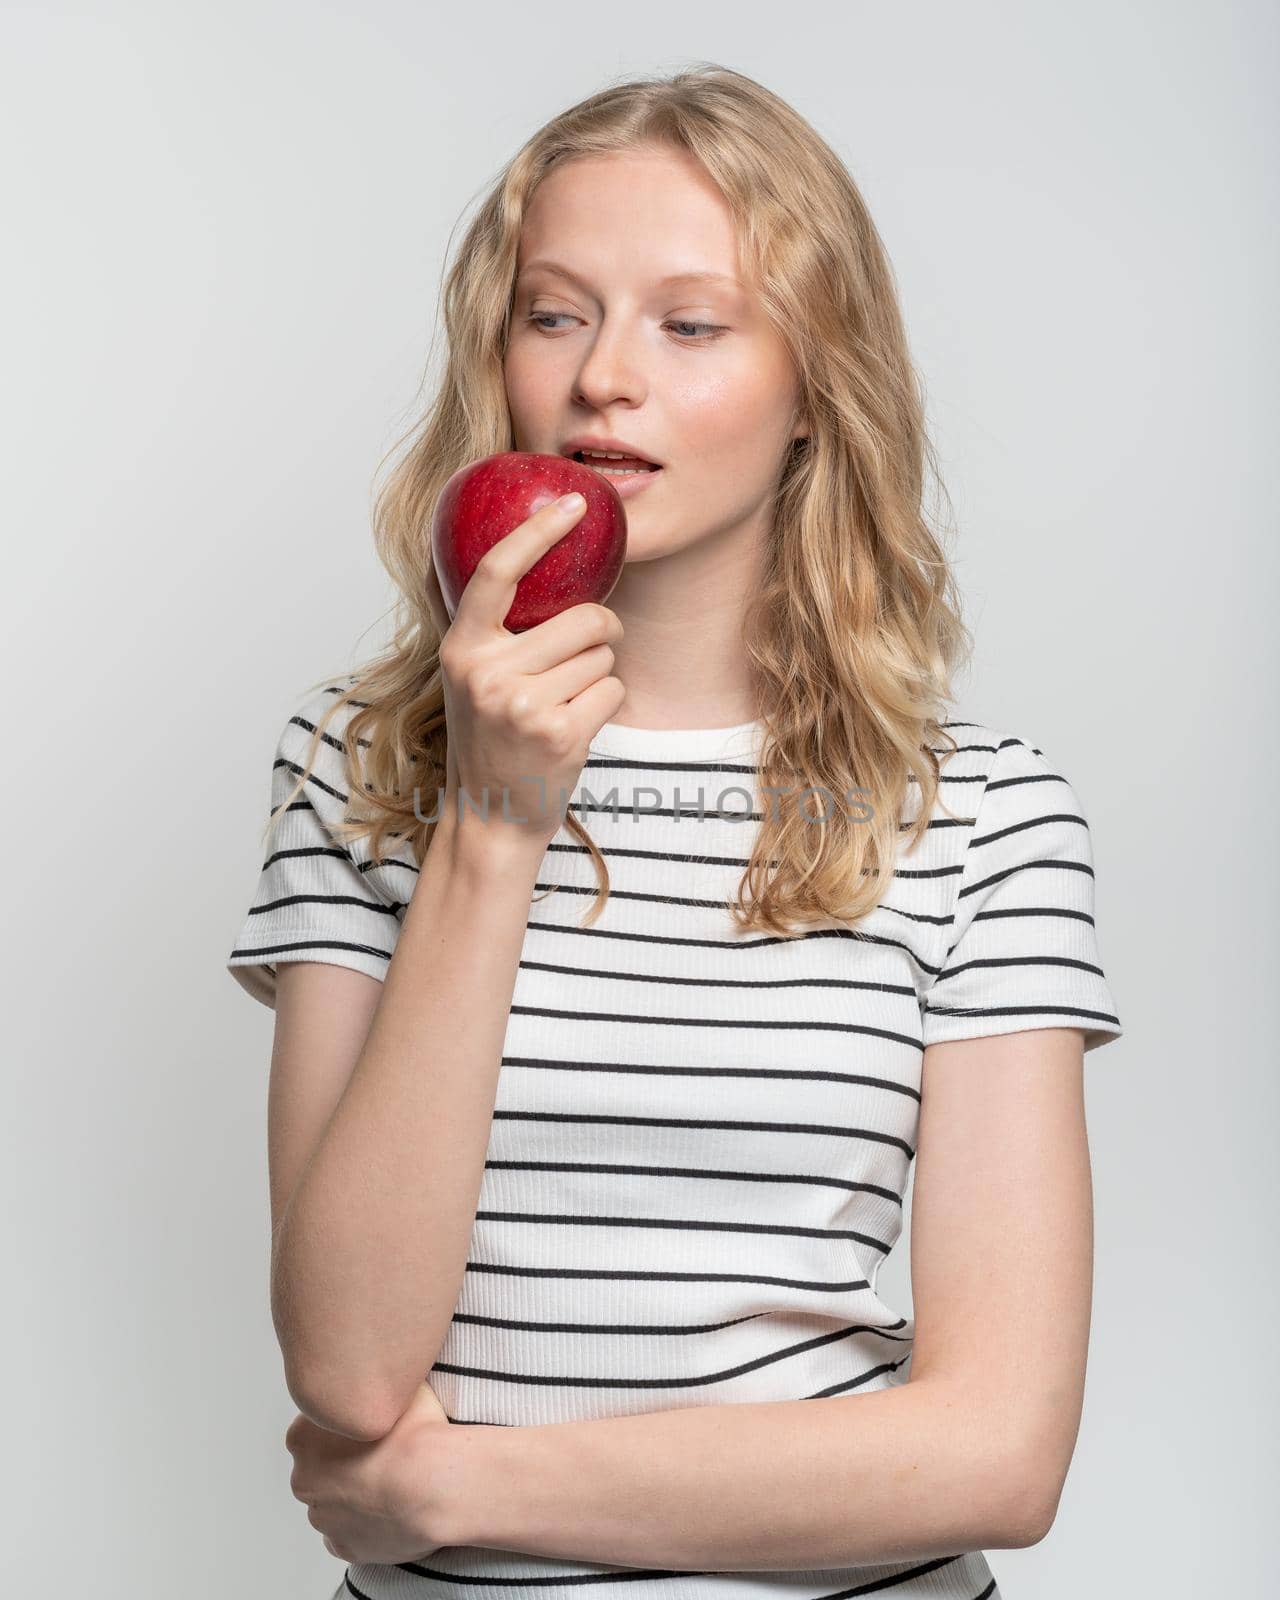 Portrait of young smiling woman bitting red apple. Fresh face, natural beauty, realistic. Clean young fresh skin without makeup and retouching. Healthy care